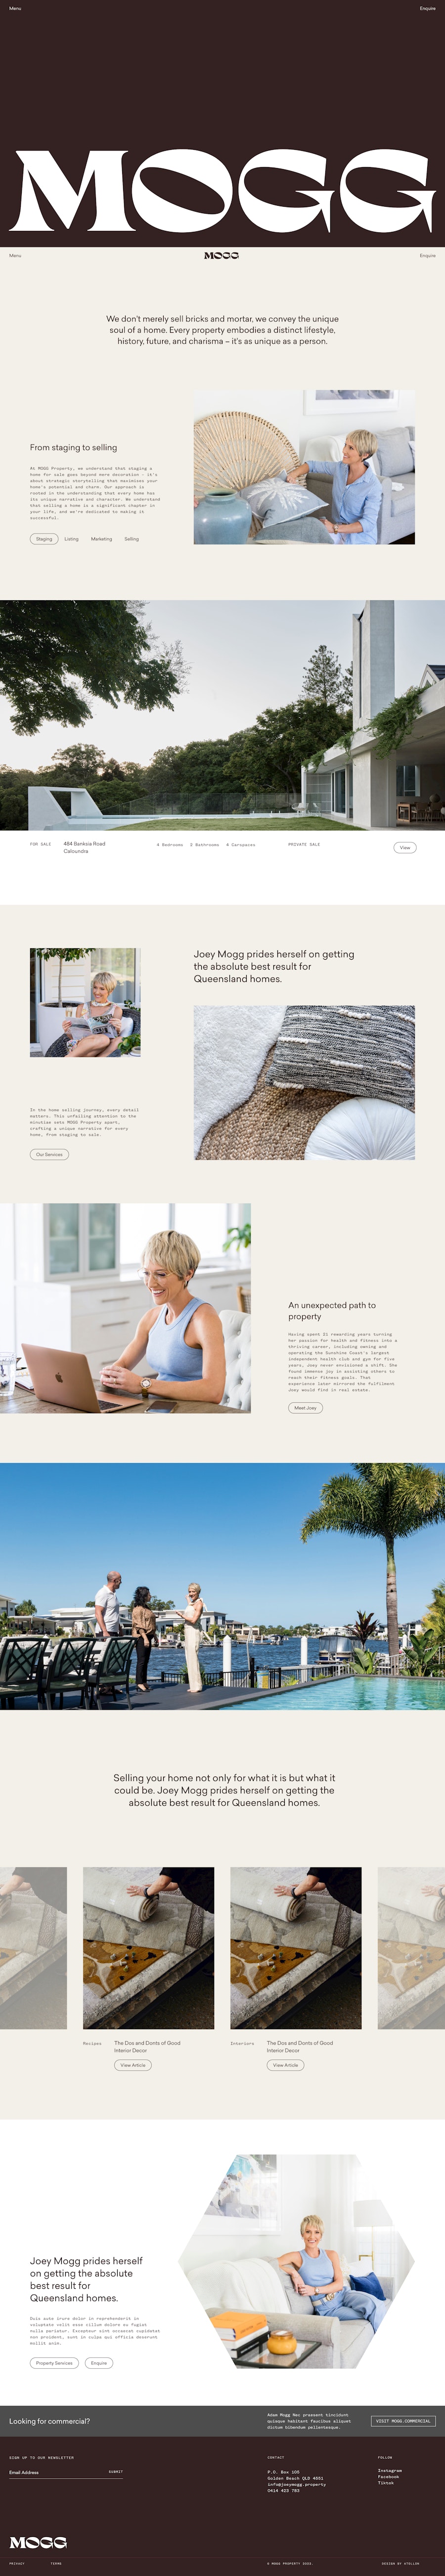 Mogg Property Home Page Design by Atollon